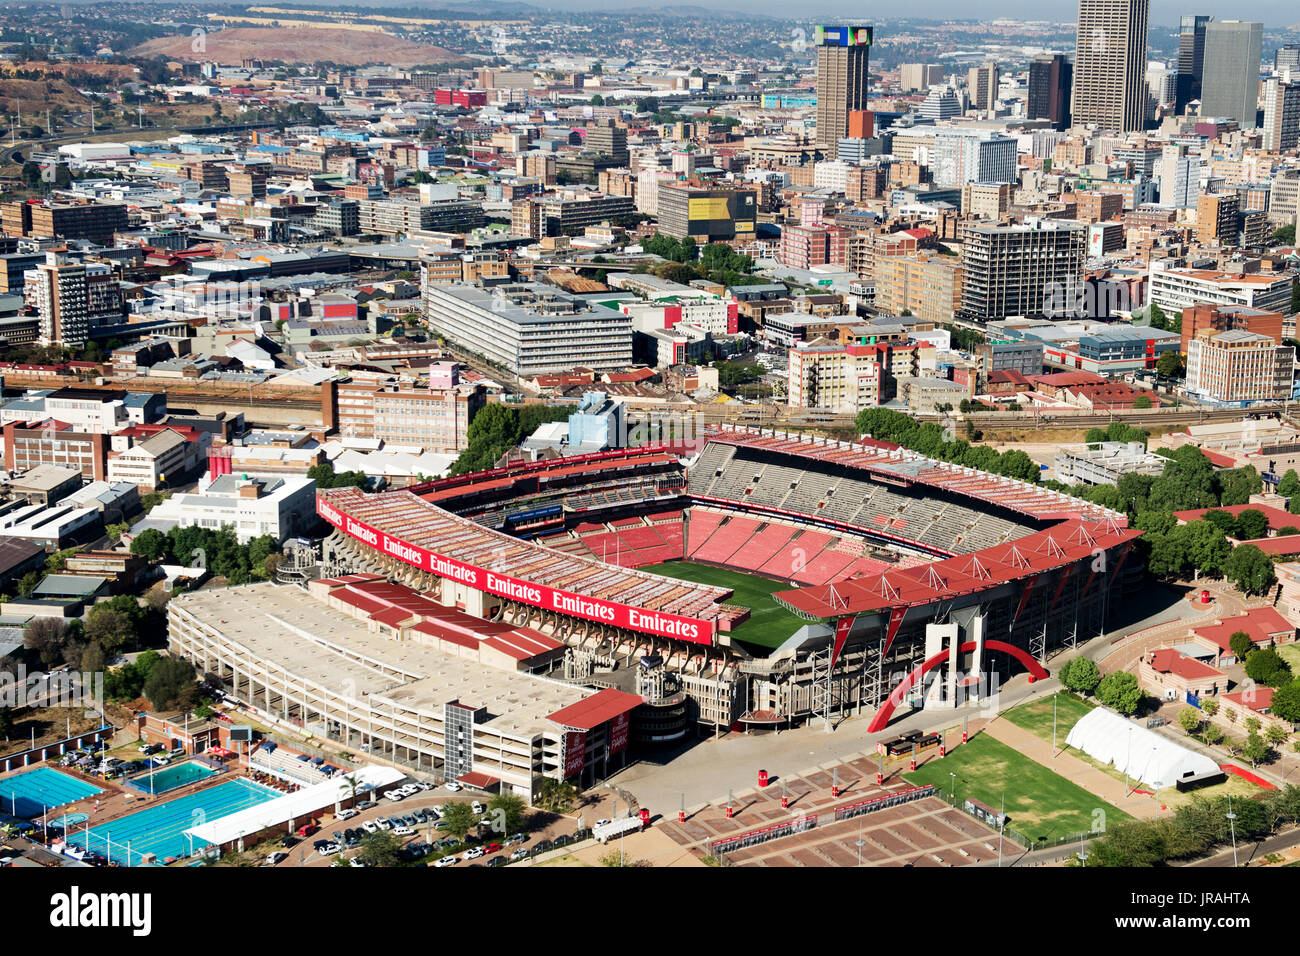 JOHANNESBURG, SOUTH AFRICA - September 24, 2016: Aerial view of the Emirates Airline Park Stock Photo